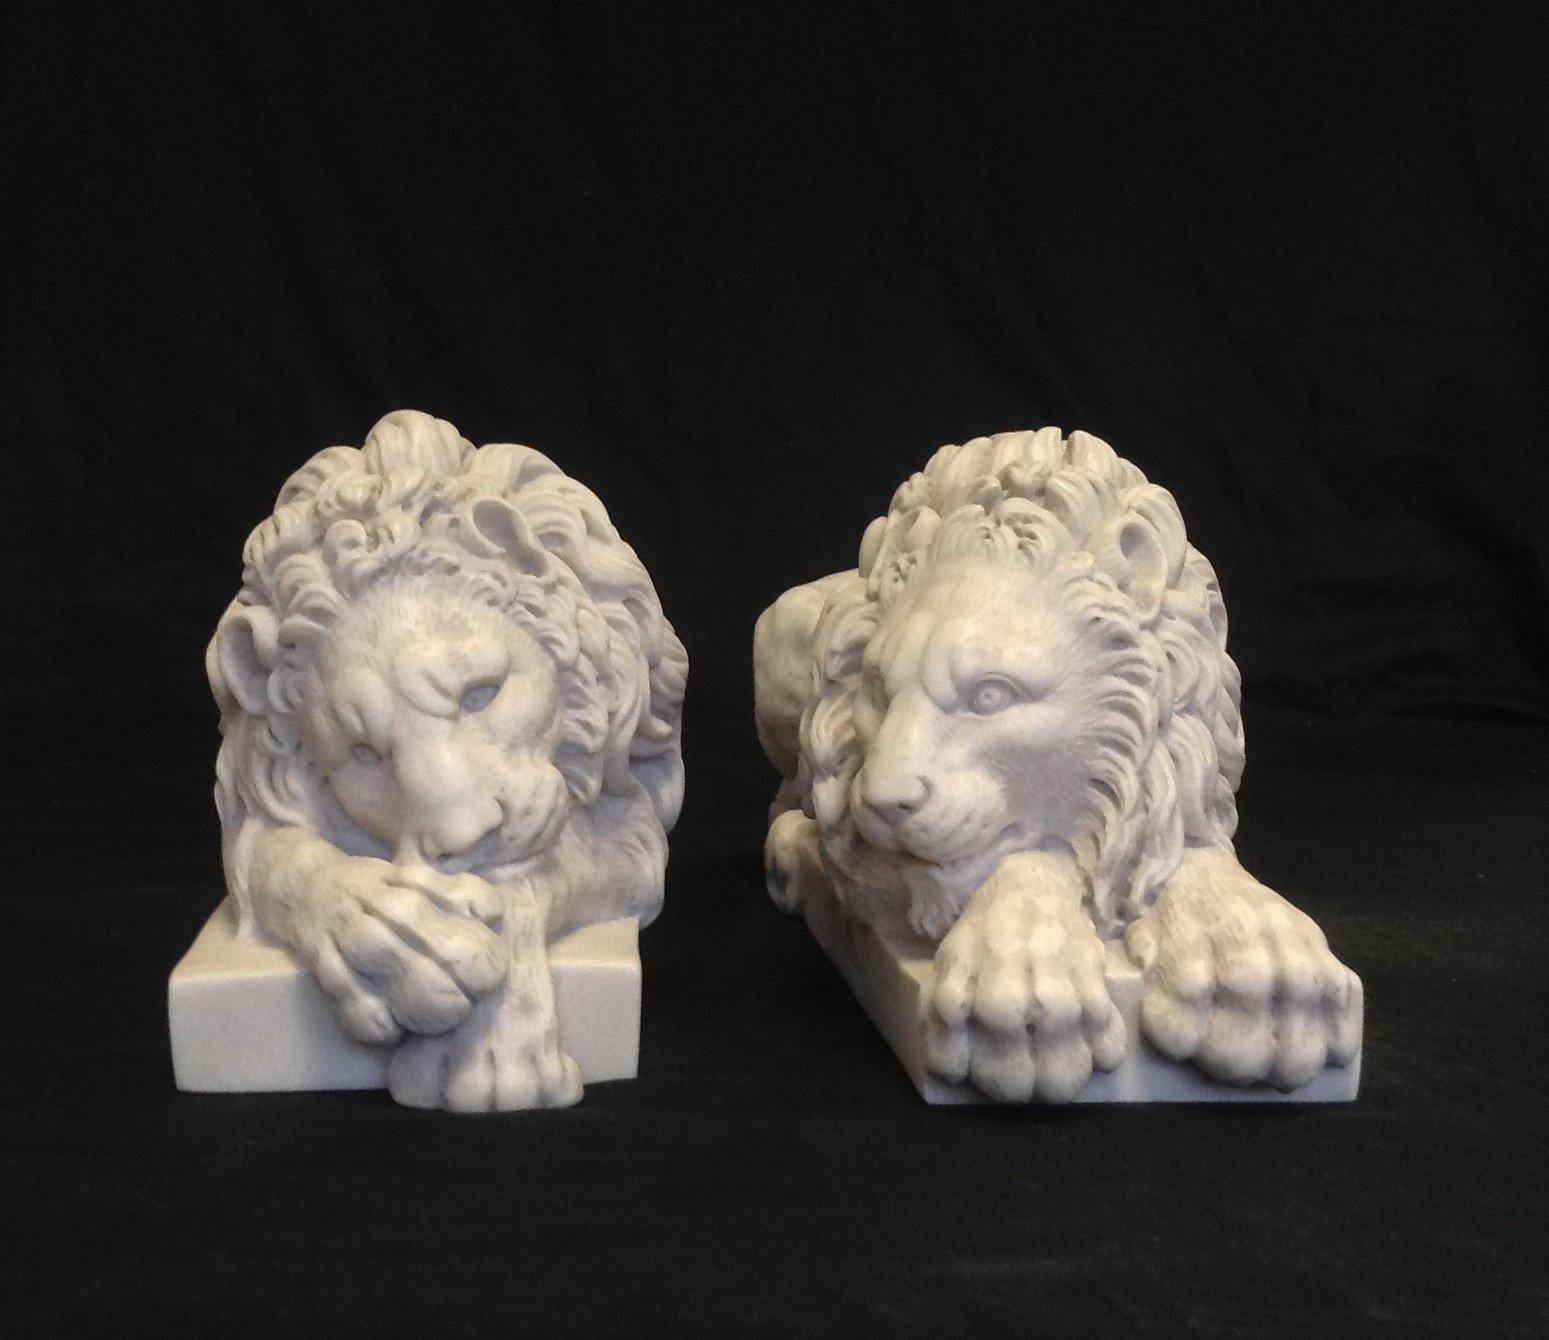 A stunning Chatsworth marble lions pair, 20th century.
The Chatsworth lions, a pair.


The famous marble Lions were originally made by the sculptor Antonio Canova for the Rezzonico monument in St. Peters, Rome. 

They were then commissioned by